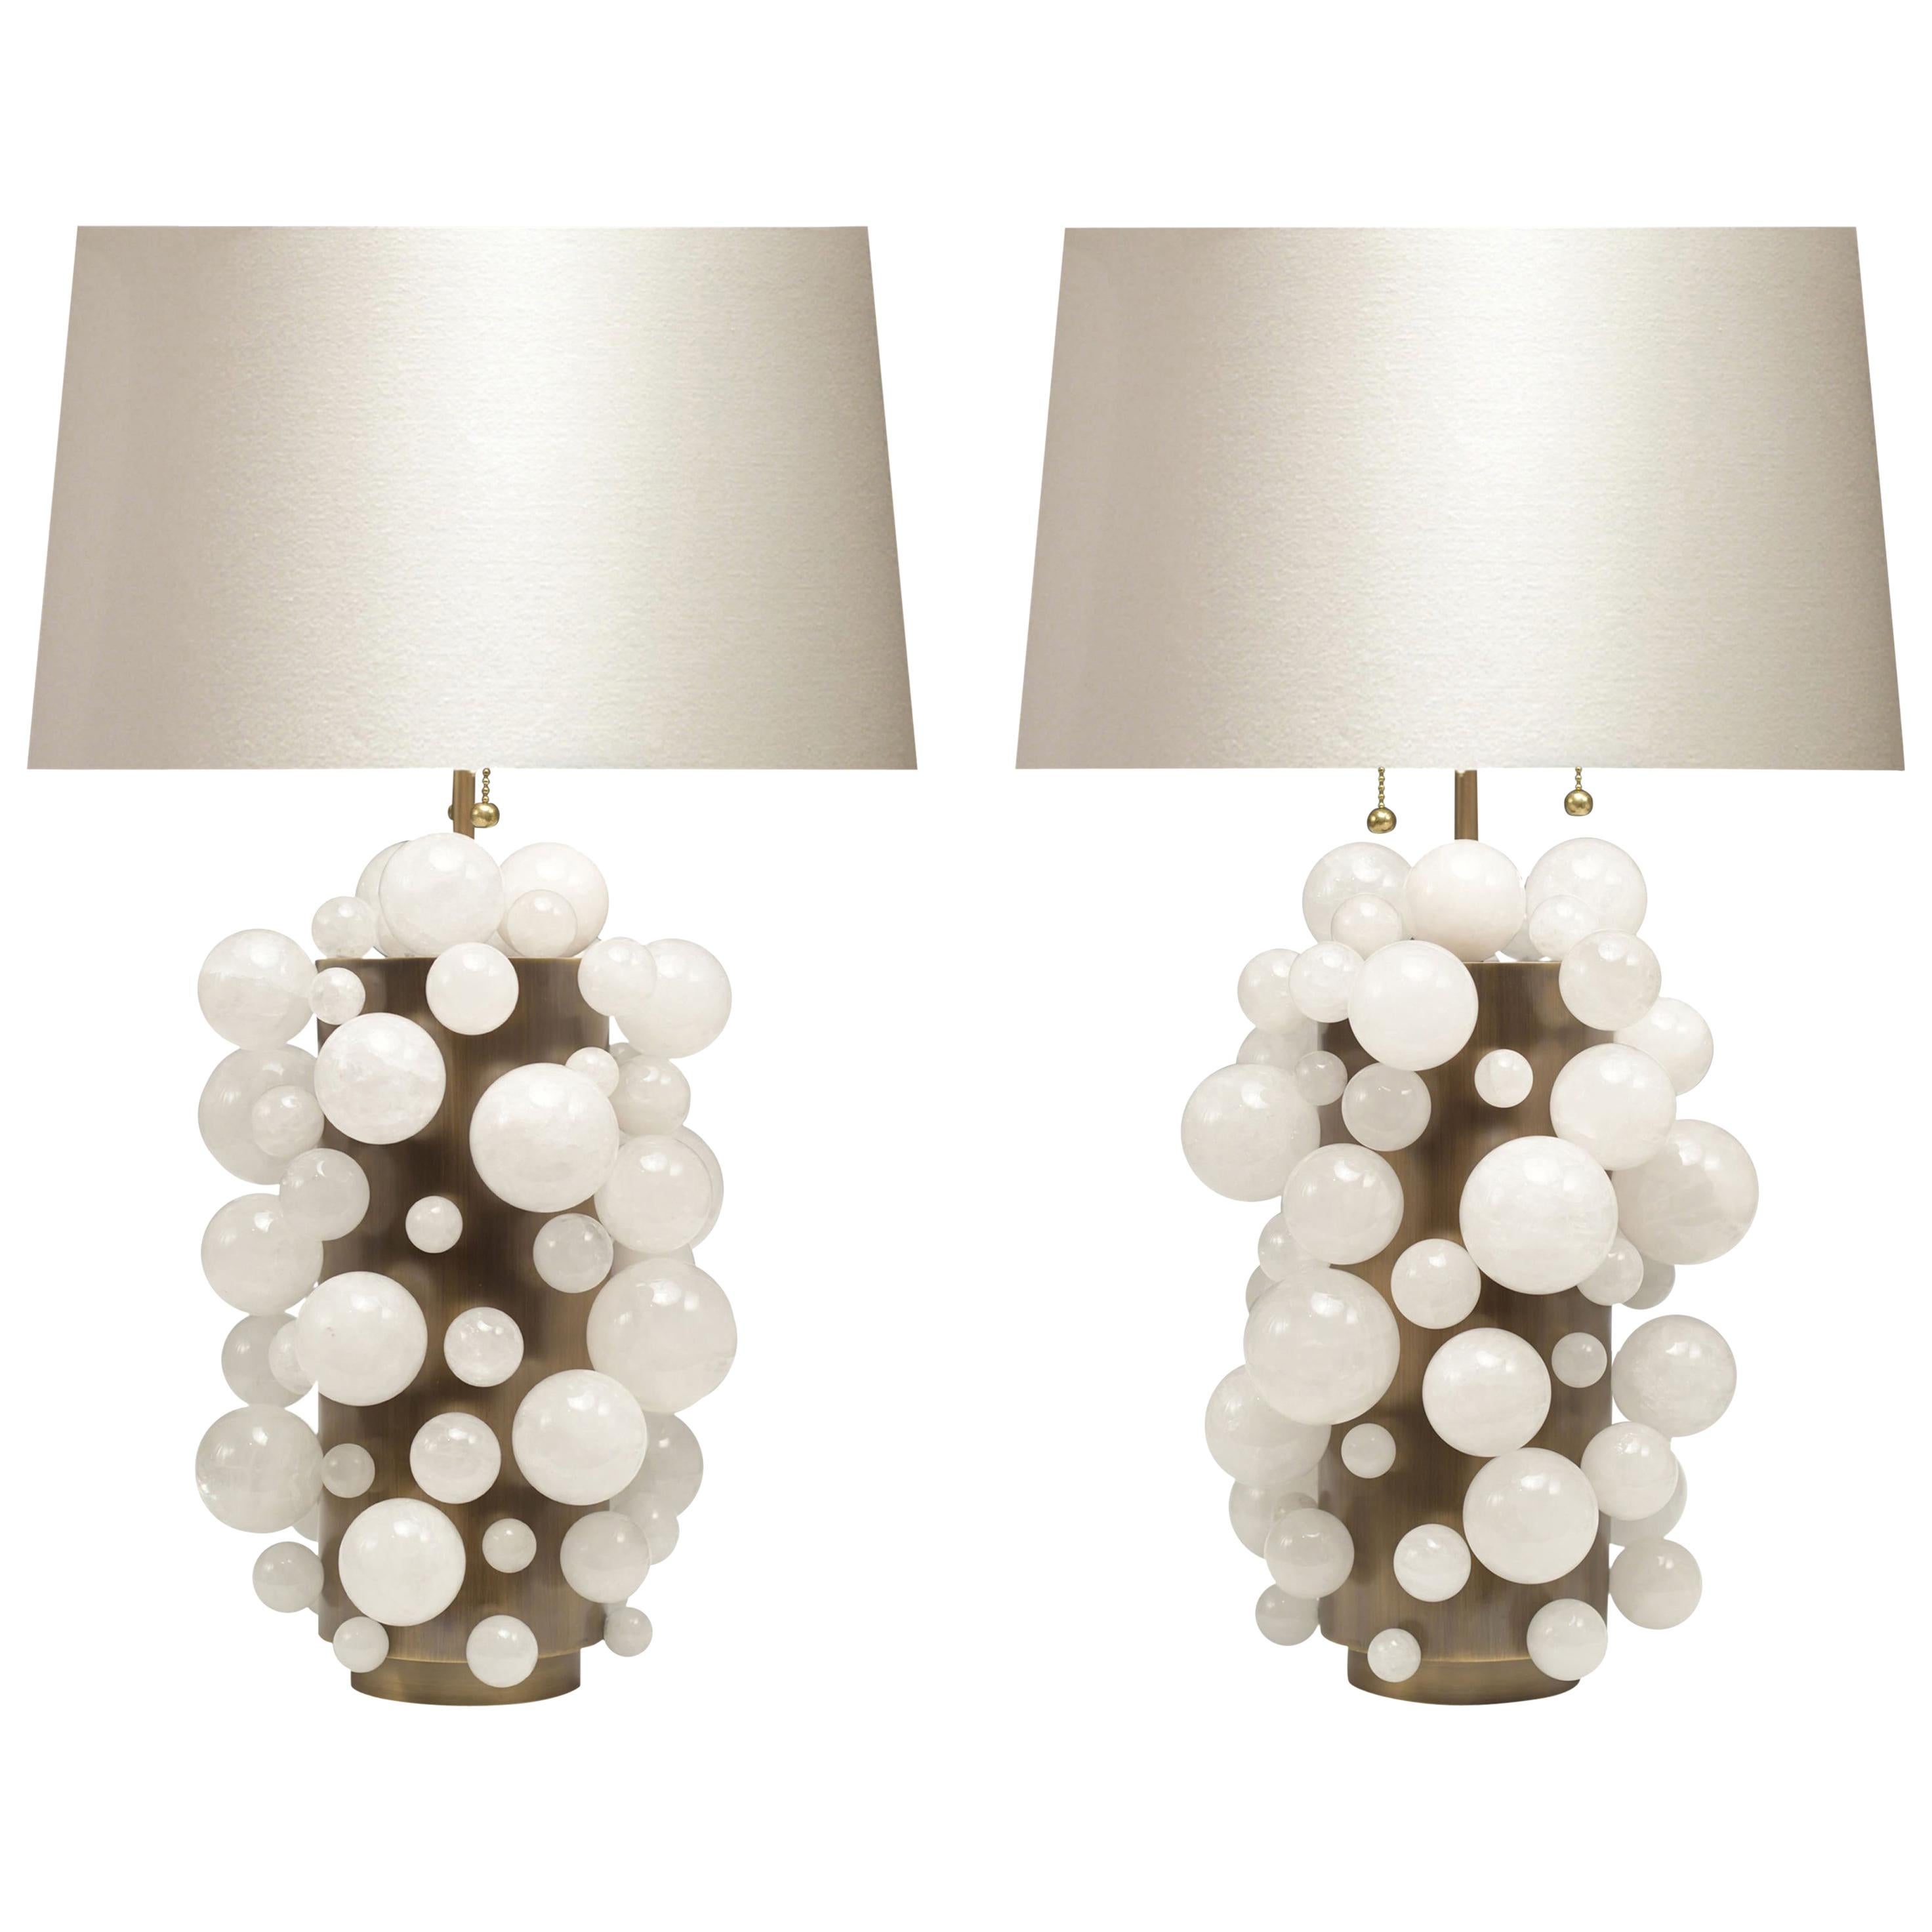 Pair of Rock Crystal Bubble Lamps